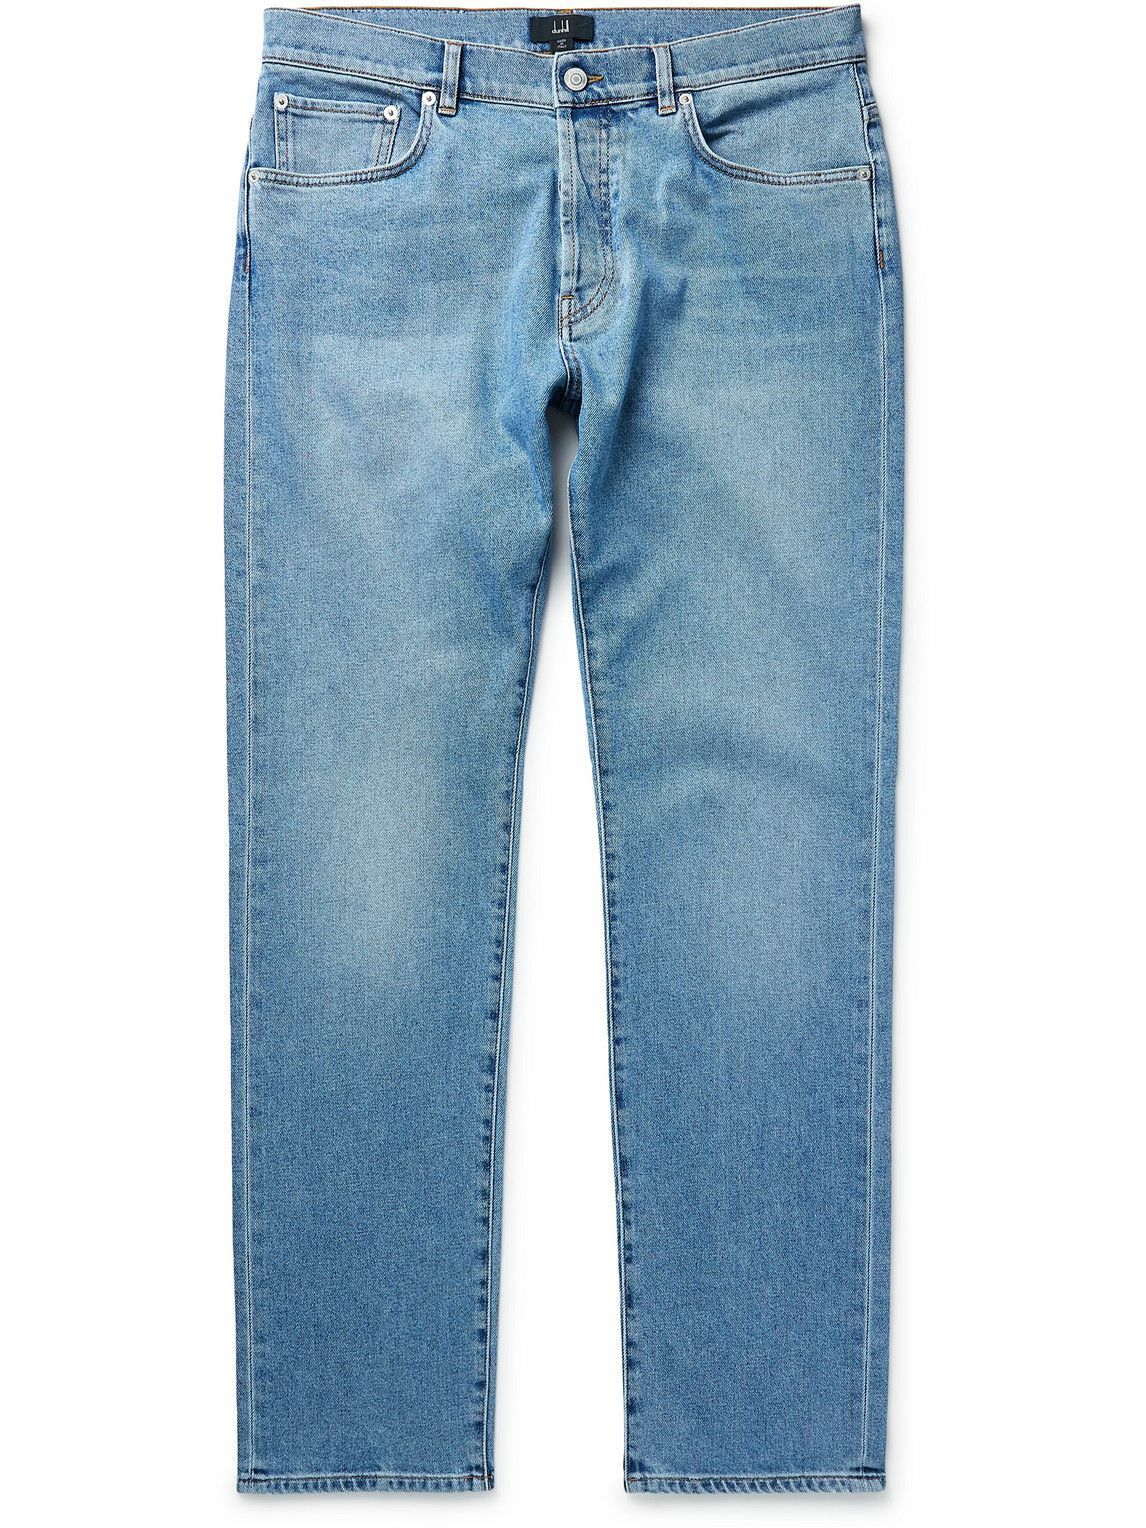 Dunhill - Straight-Leg Jeans - Blue Dunhill